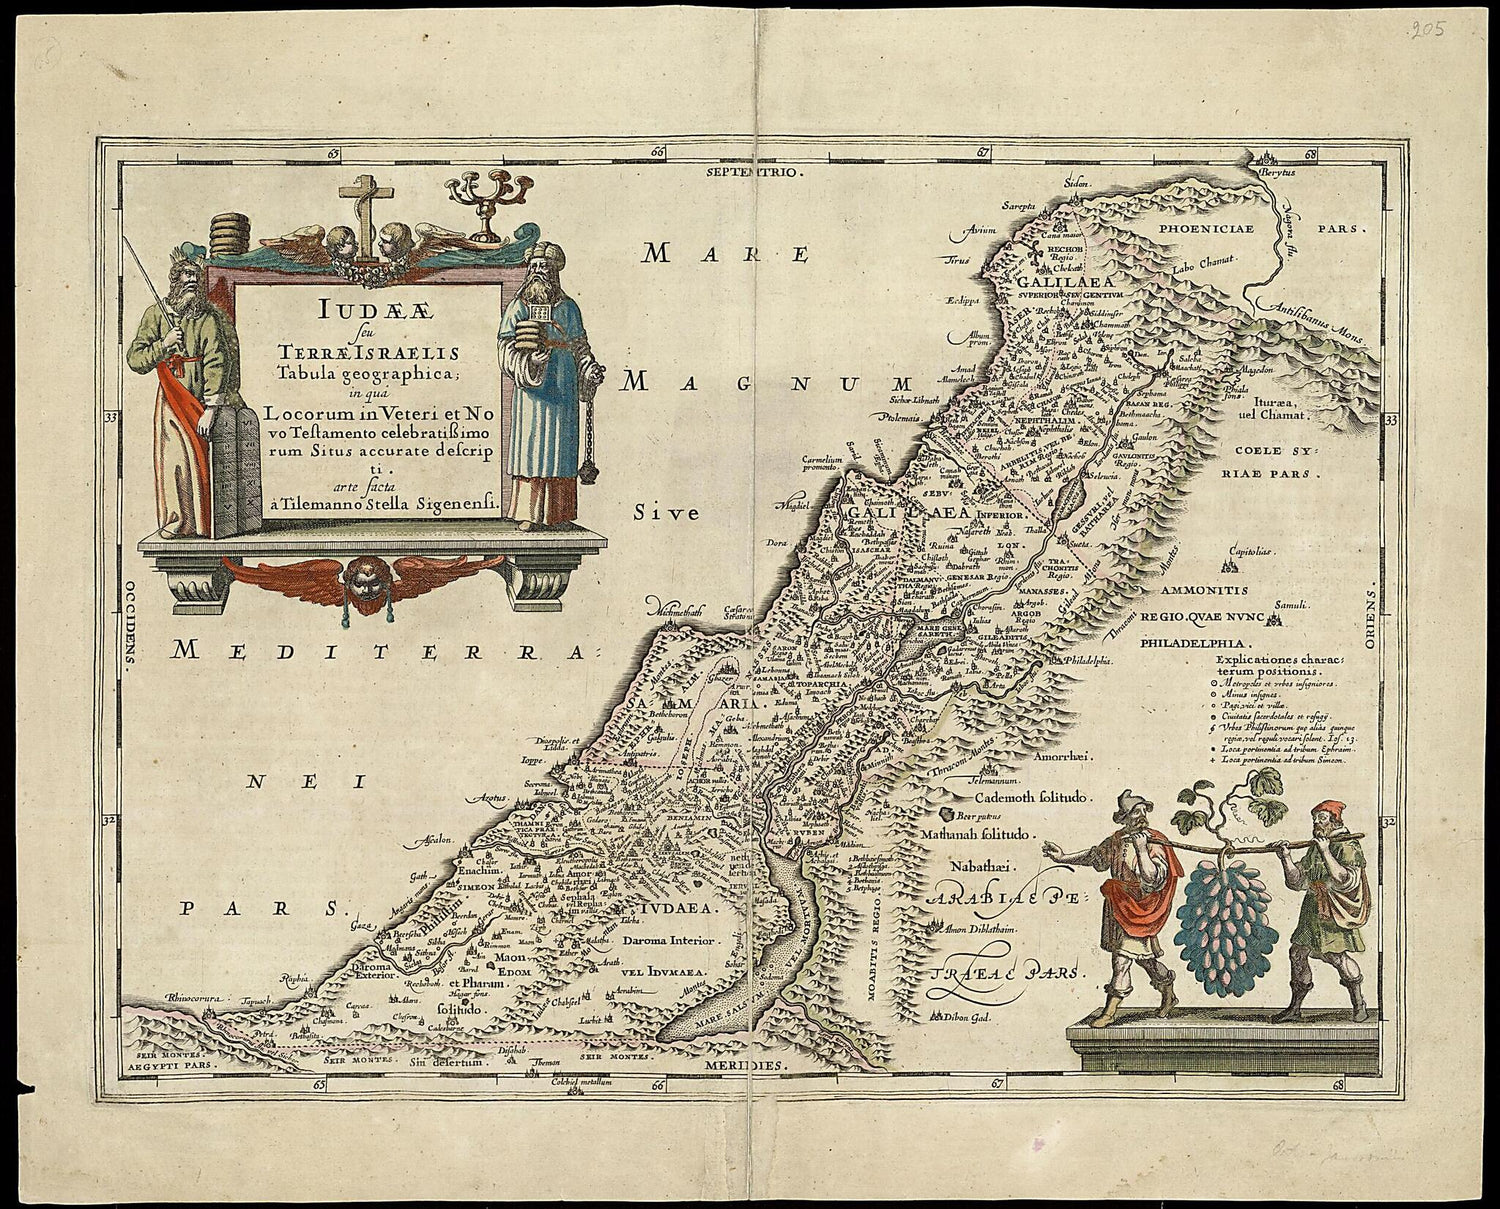 This old map of A Geographical Rendering of Judaea, Or the Land of Israel, In Which the Positions of the Most Famous Places In the Old and New Testament Are Precisely Depicted. (Iudaeae Seu Terrae Israelis Tabula Geographica; In Qua Locorum In Veteri Et 